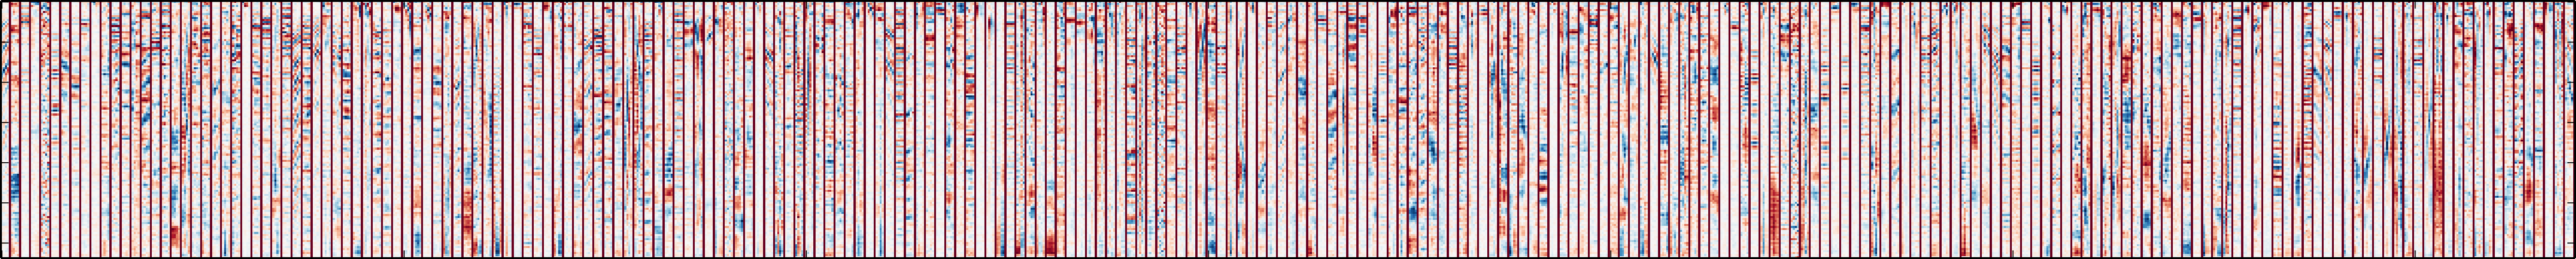 From this representation, we can see that a lot of the filters pick up harmonic content, which manifests itself as parallel red and blue bands at different frequencies. Sometimes, these bands are are slanted up or down, indicating the presence of rising and falling pitches. It turns out that these filters tend to detect human voices.